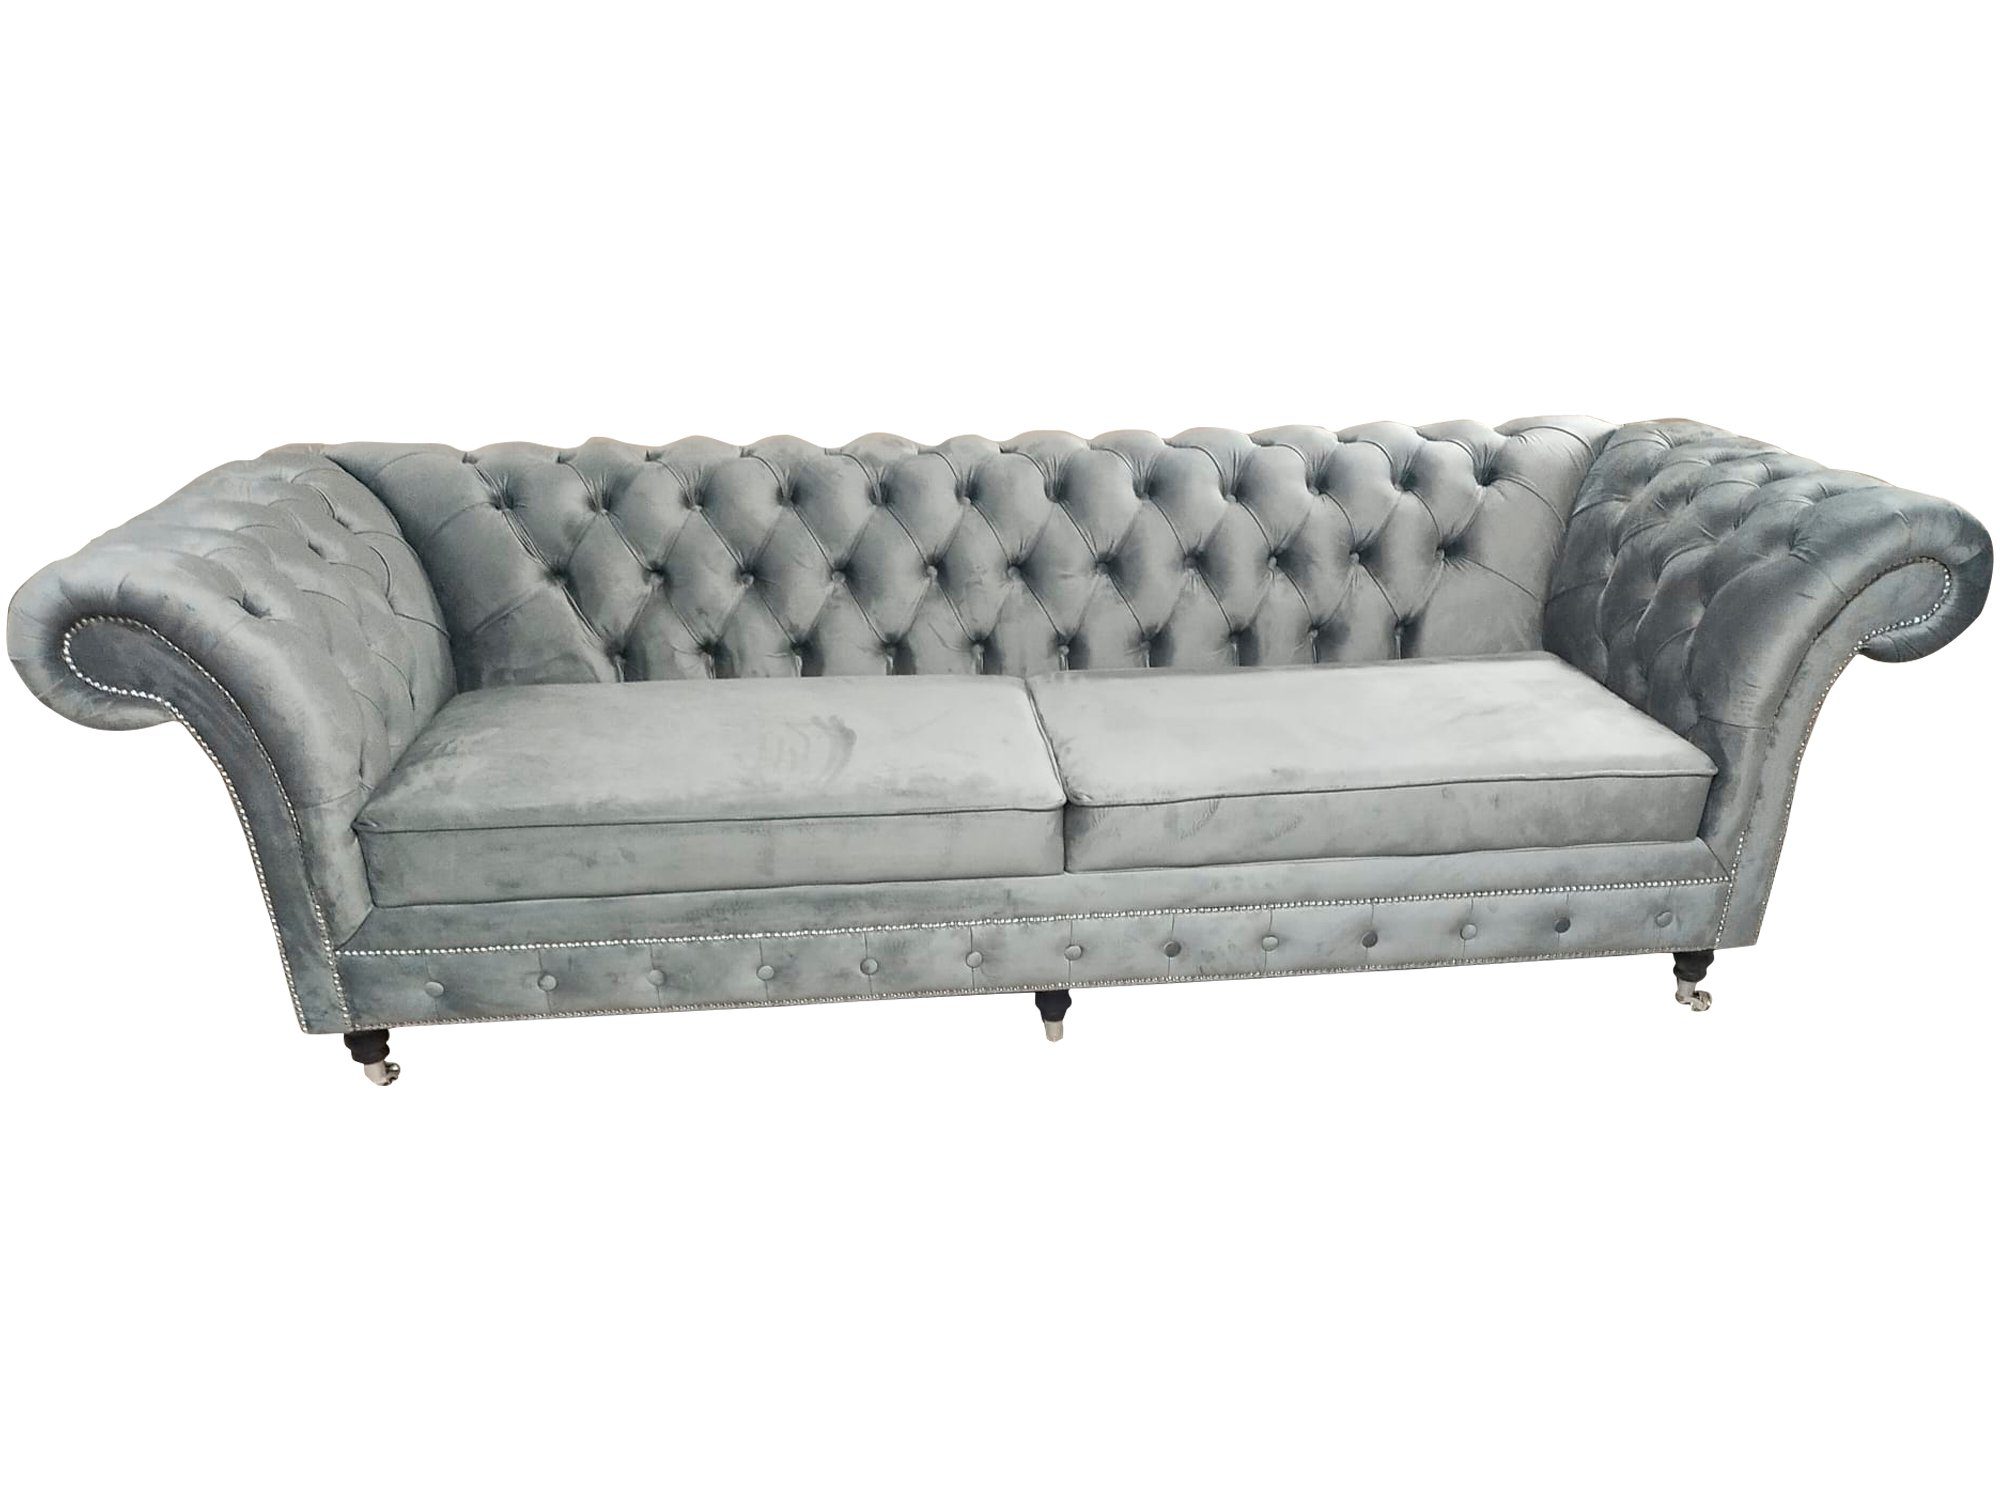 Sofas Polster Textil Couch 3 Sofa Stoff Sitzer Sofa, JVmoebel Couchen Chesterfield